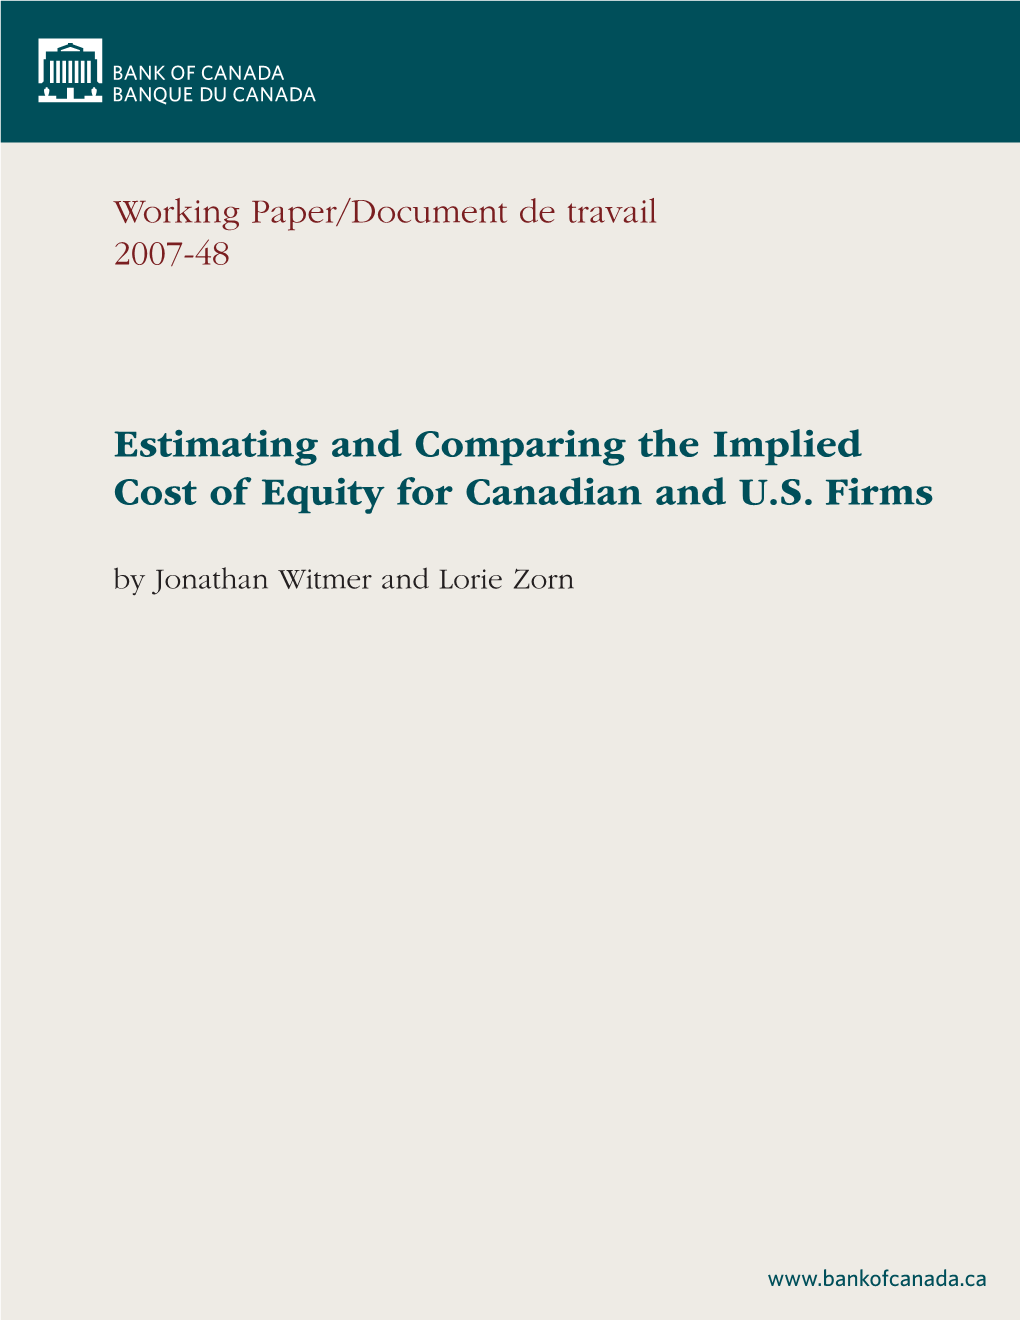 Estimating and Comparing the Implied Cost of Equity for Canadian and U.S